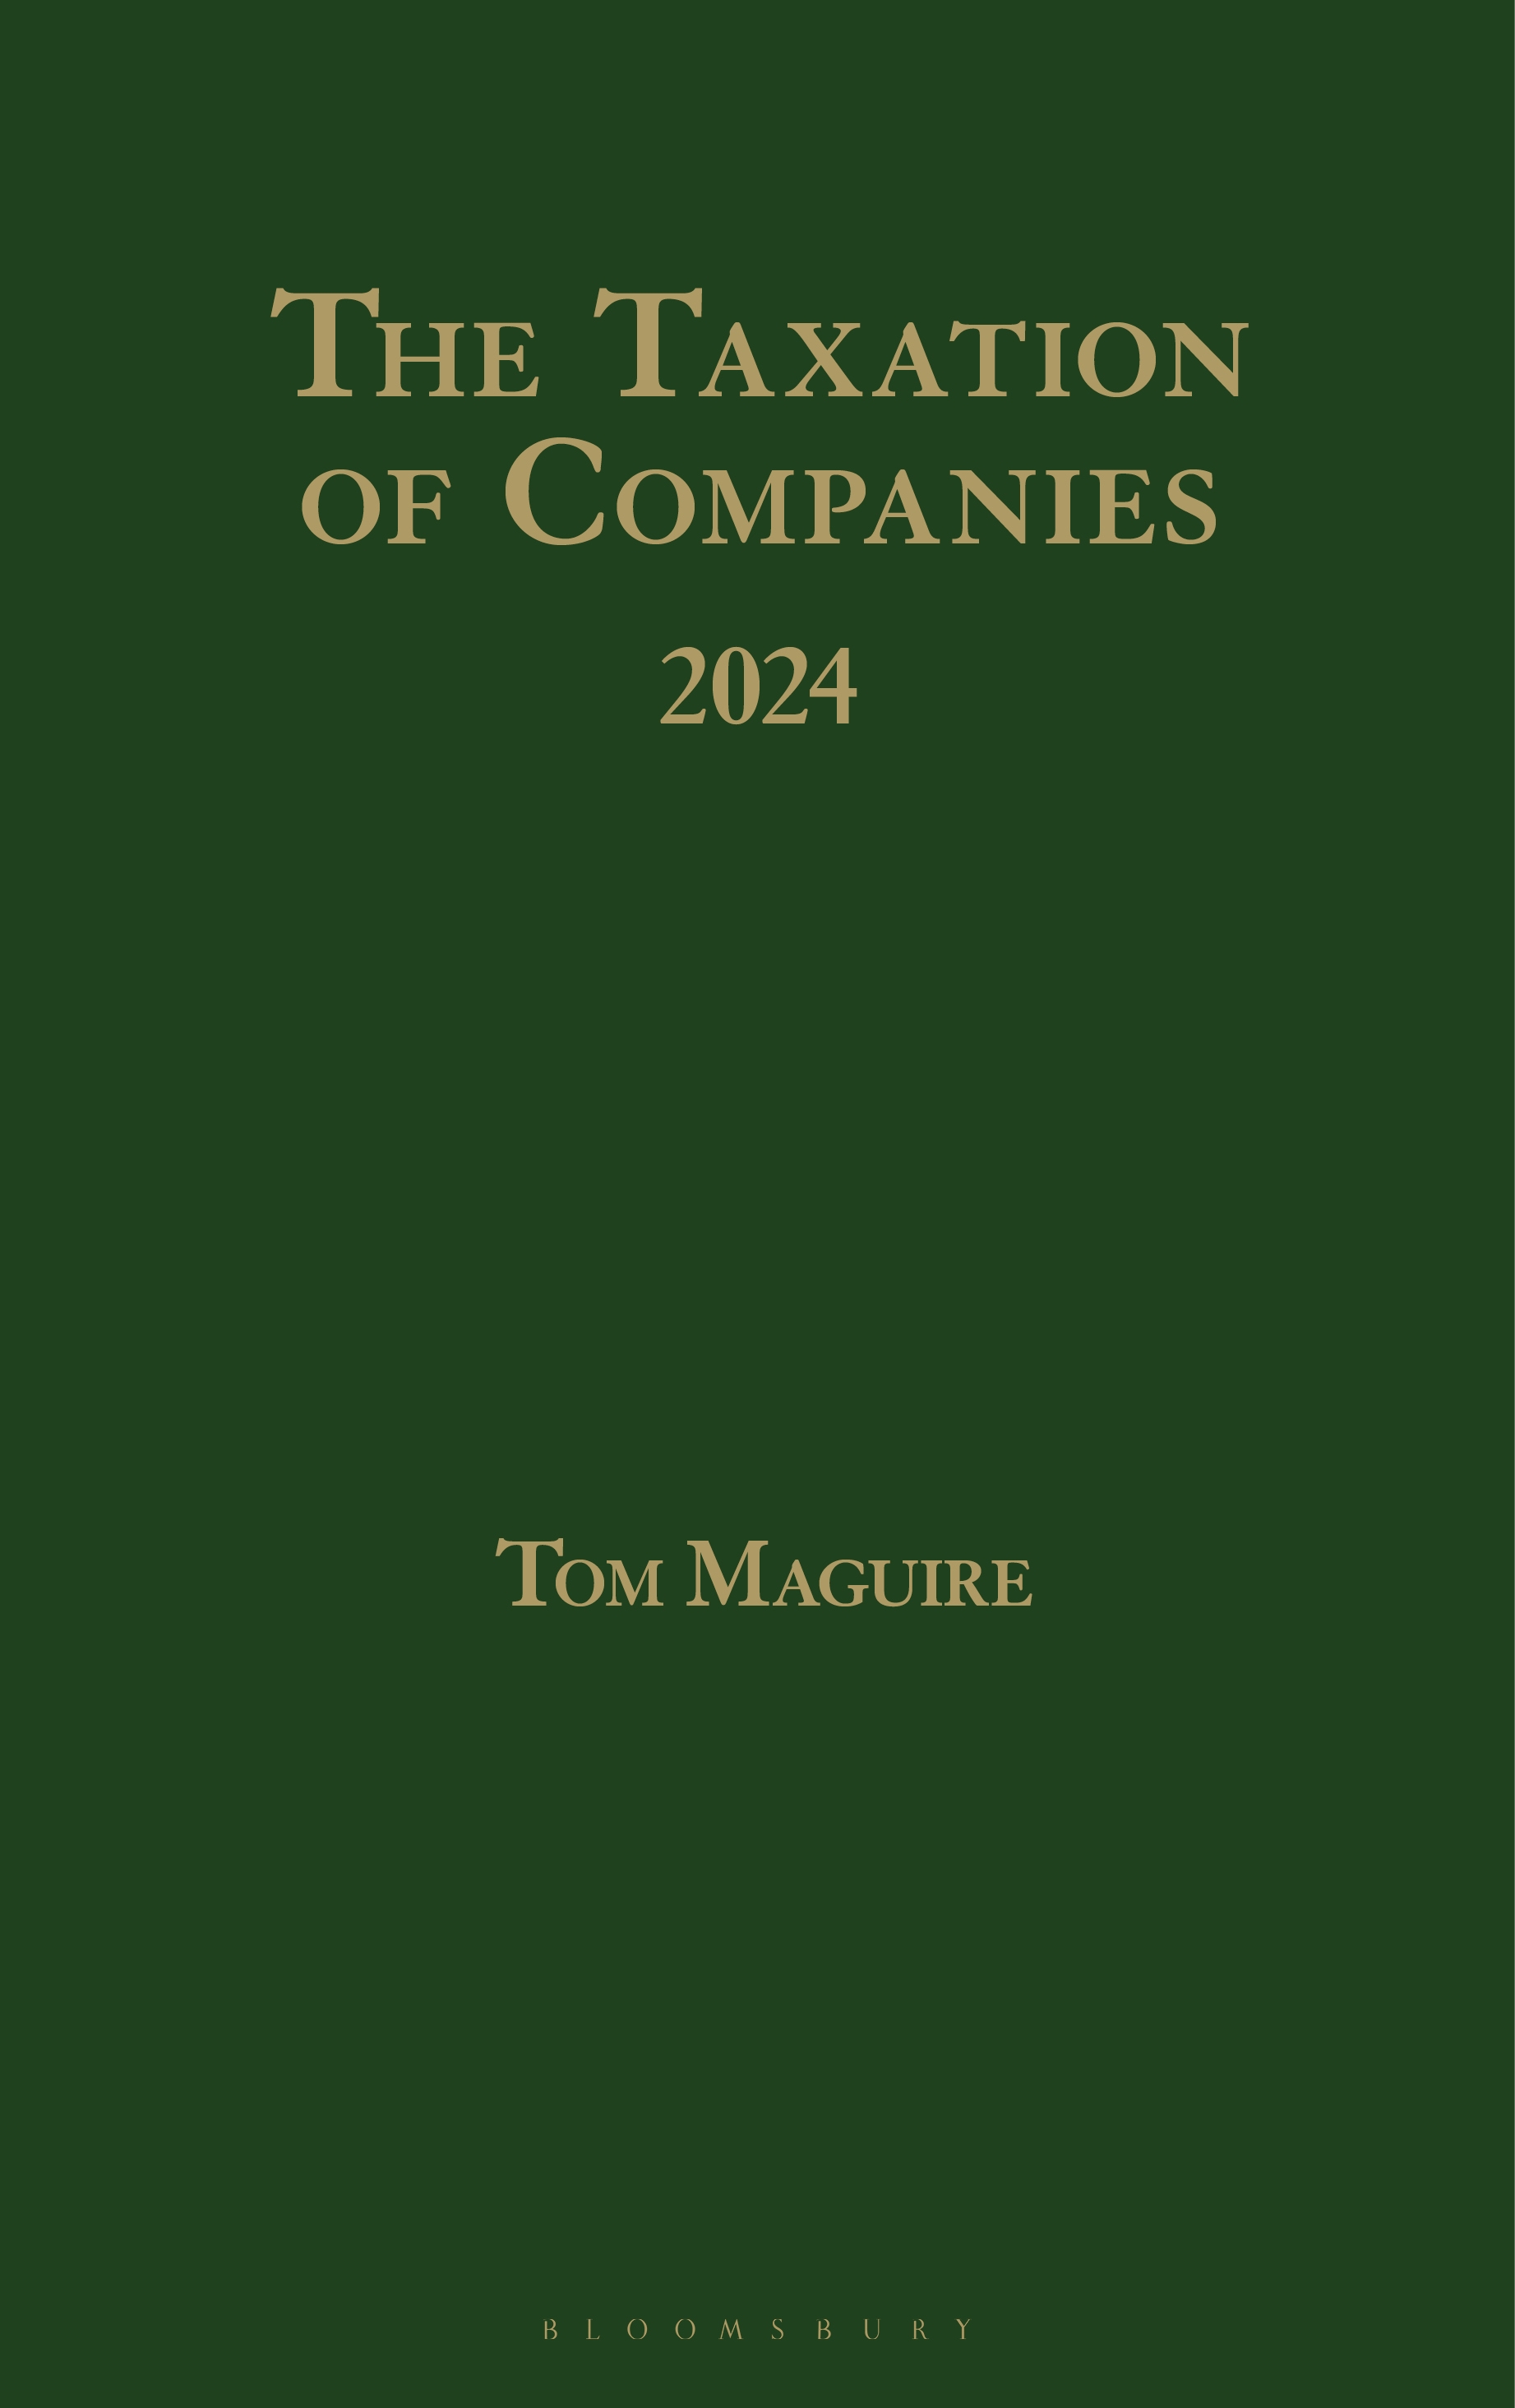 Taxation of Companies 2024 book jacket